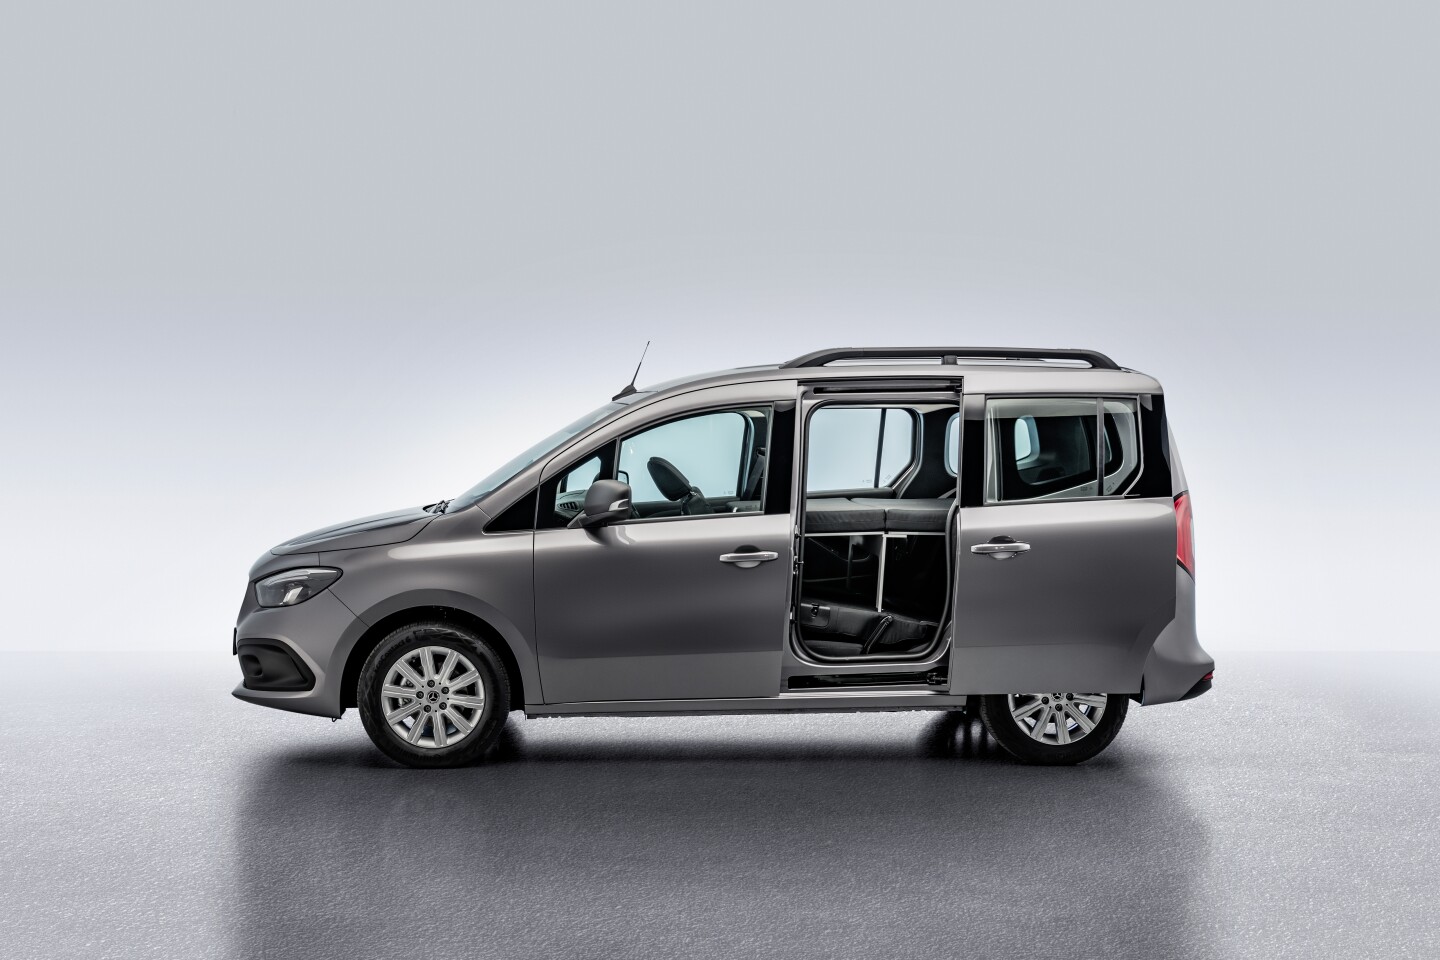 The Citan uses its two sliding doors for a convenient micro-camper configuration